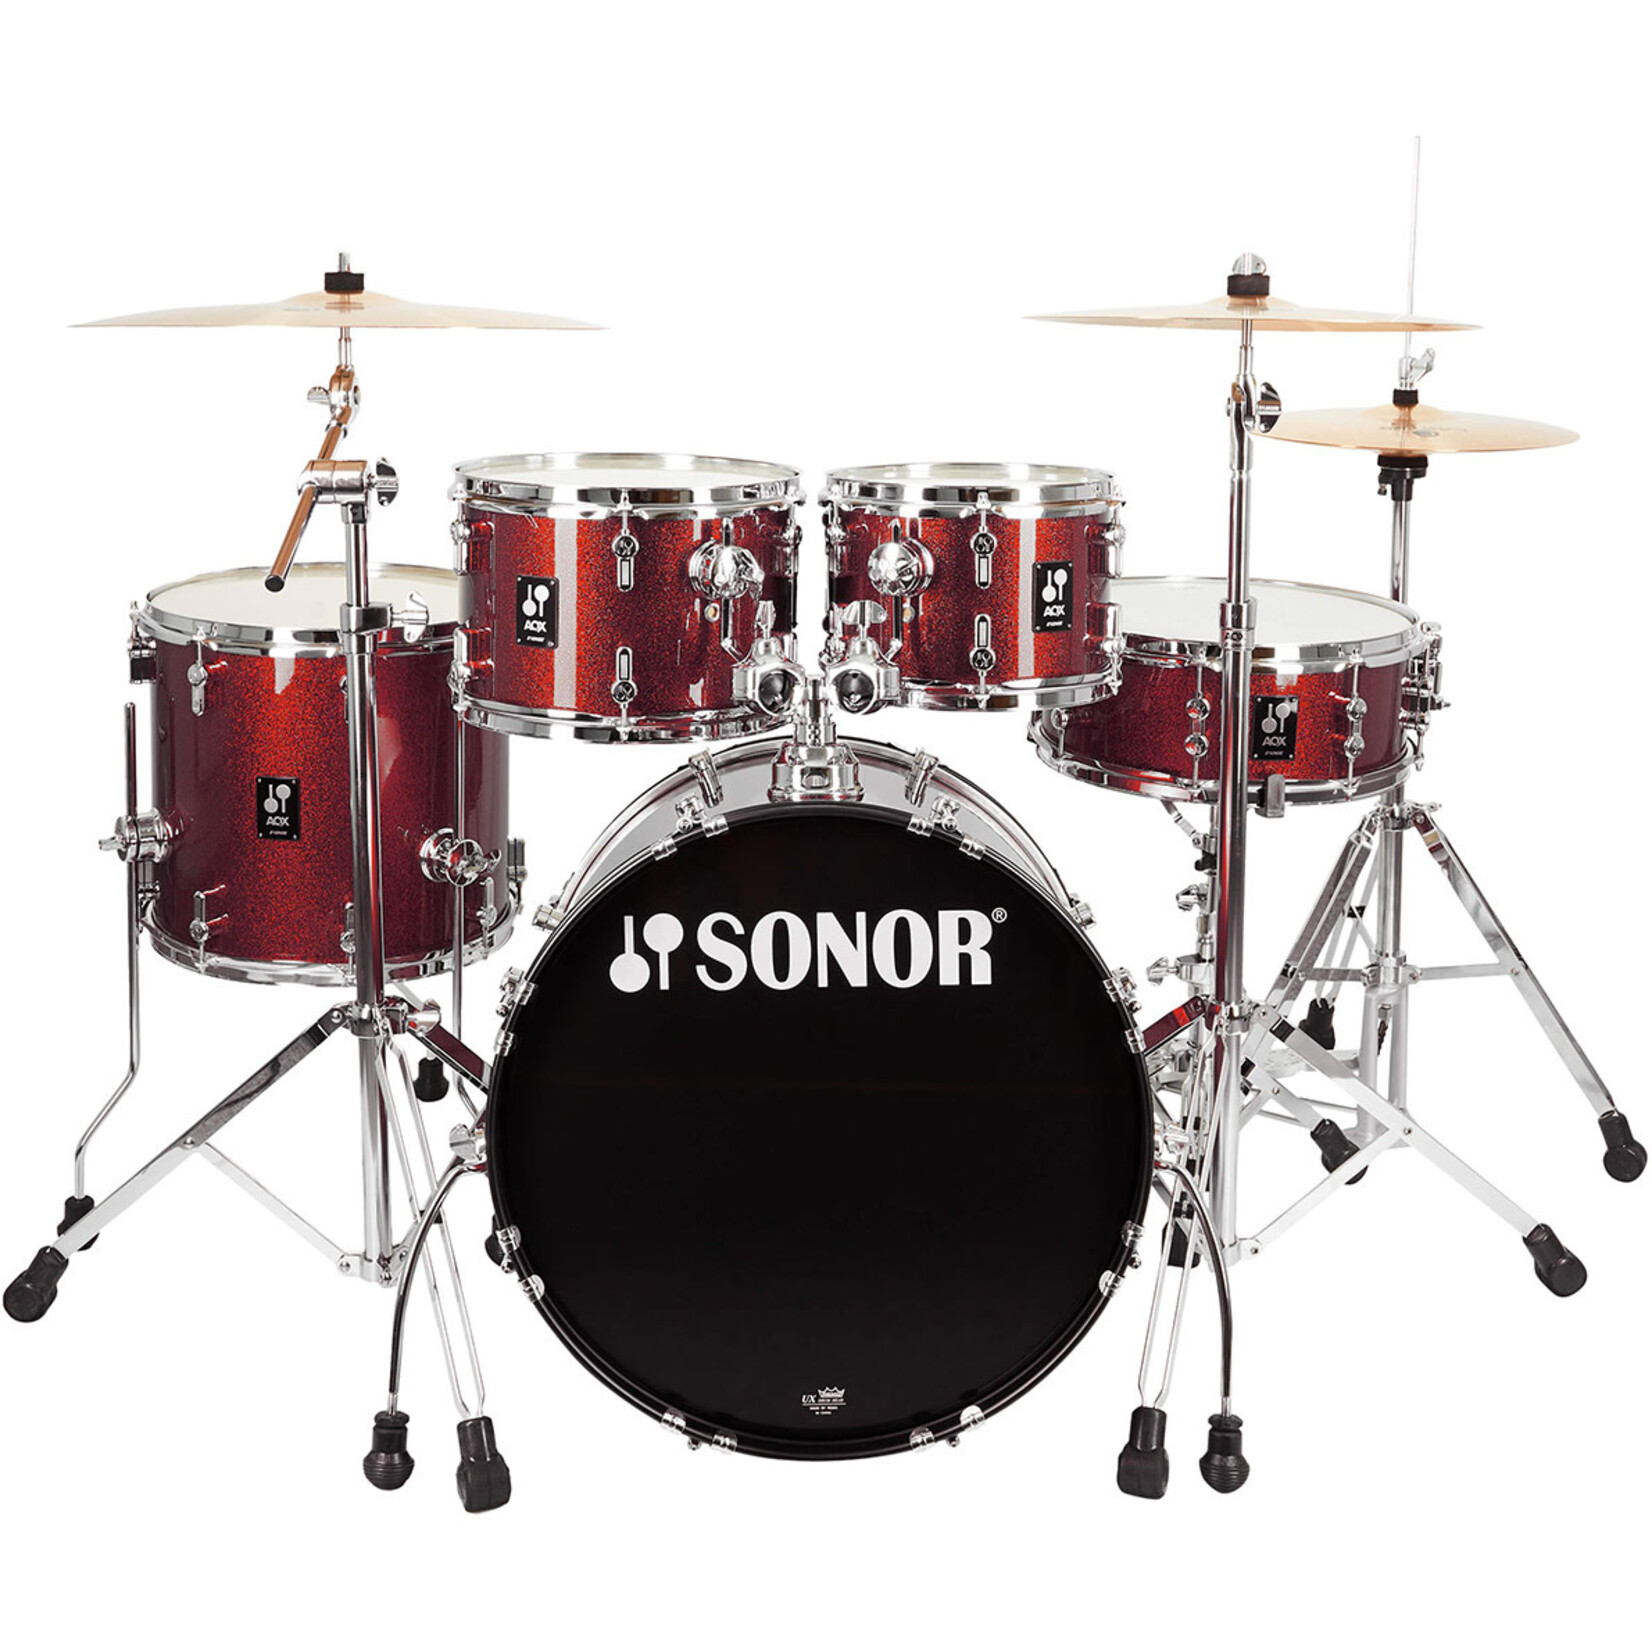 Sonor Sonor AQX Stage, Complete Kit with Hardware and Sabian SBR Cymbals 22/10/12/16/5.5x14SN (Red Moon Sparkle)